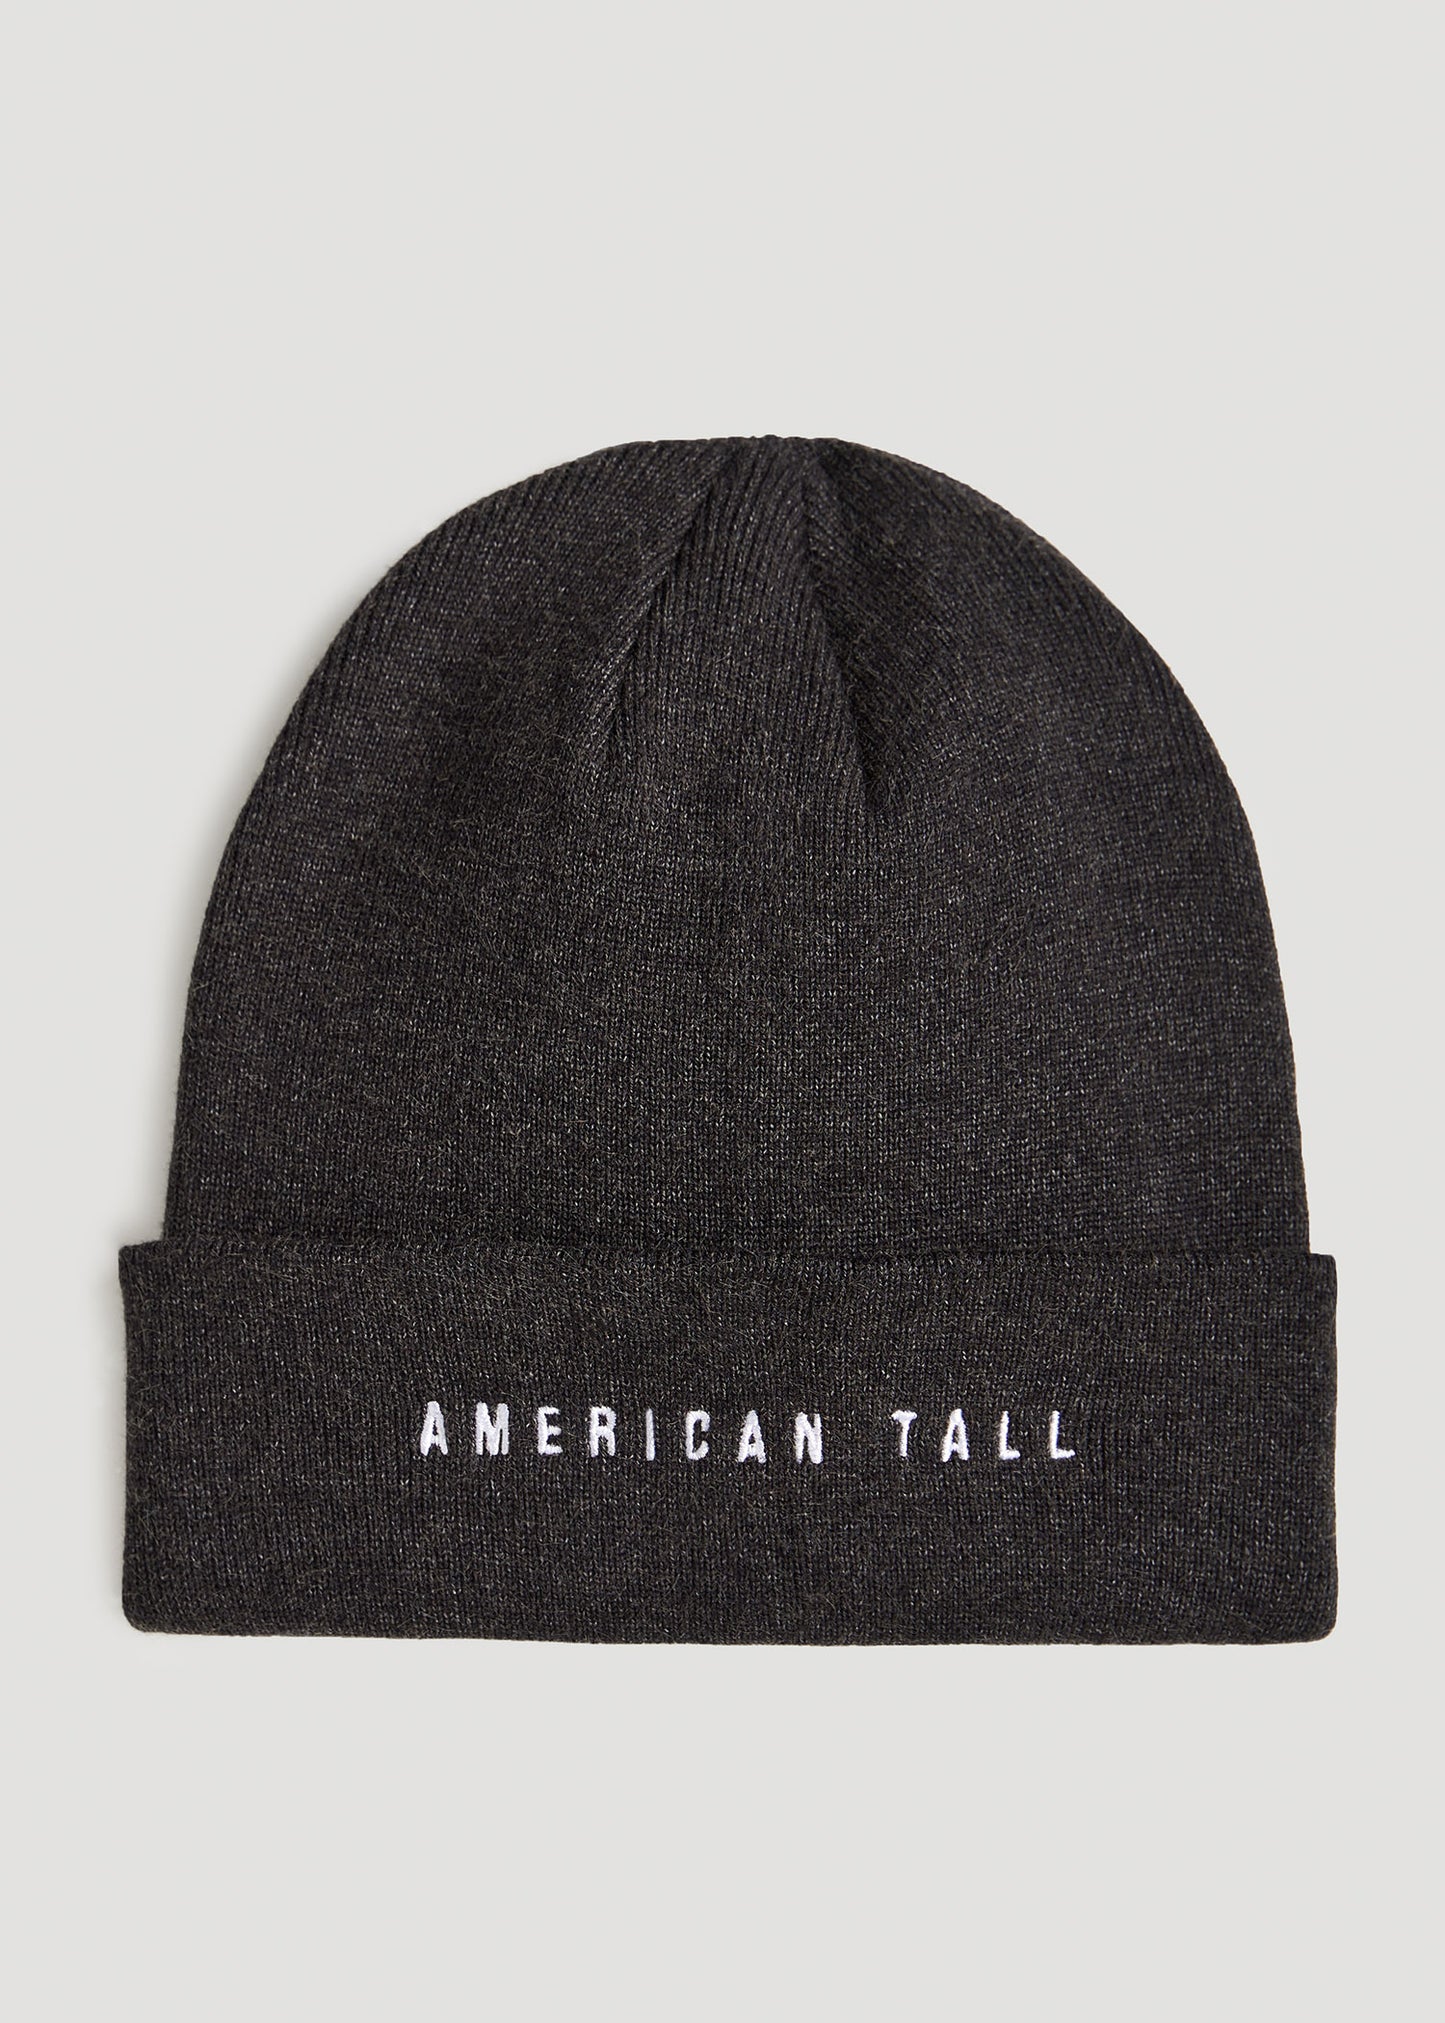       American-Tall-Knit-Beanie-in-Charcoal-One-Size-Fits-All-Charcoal-front